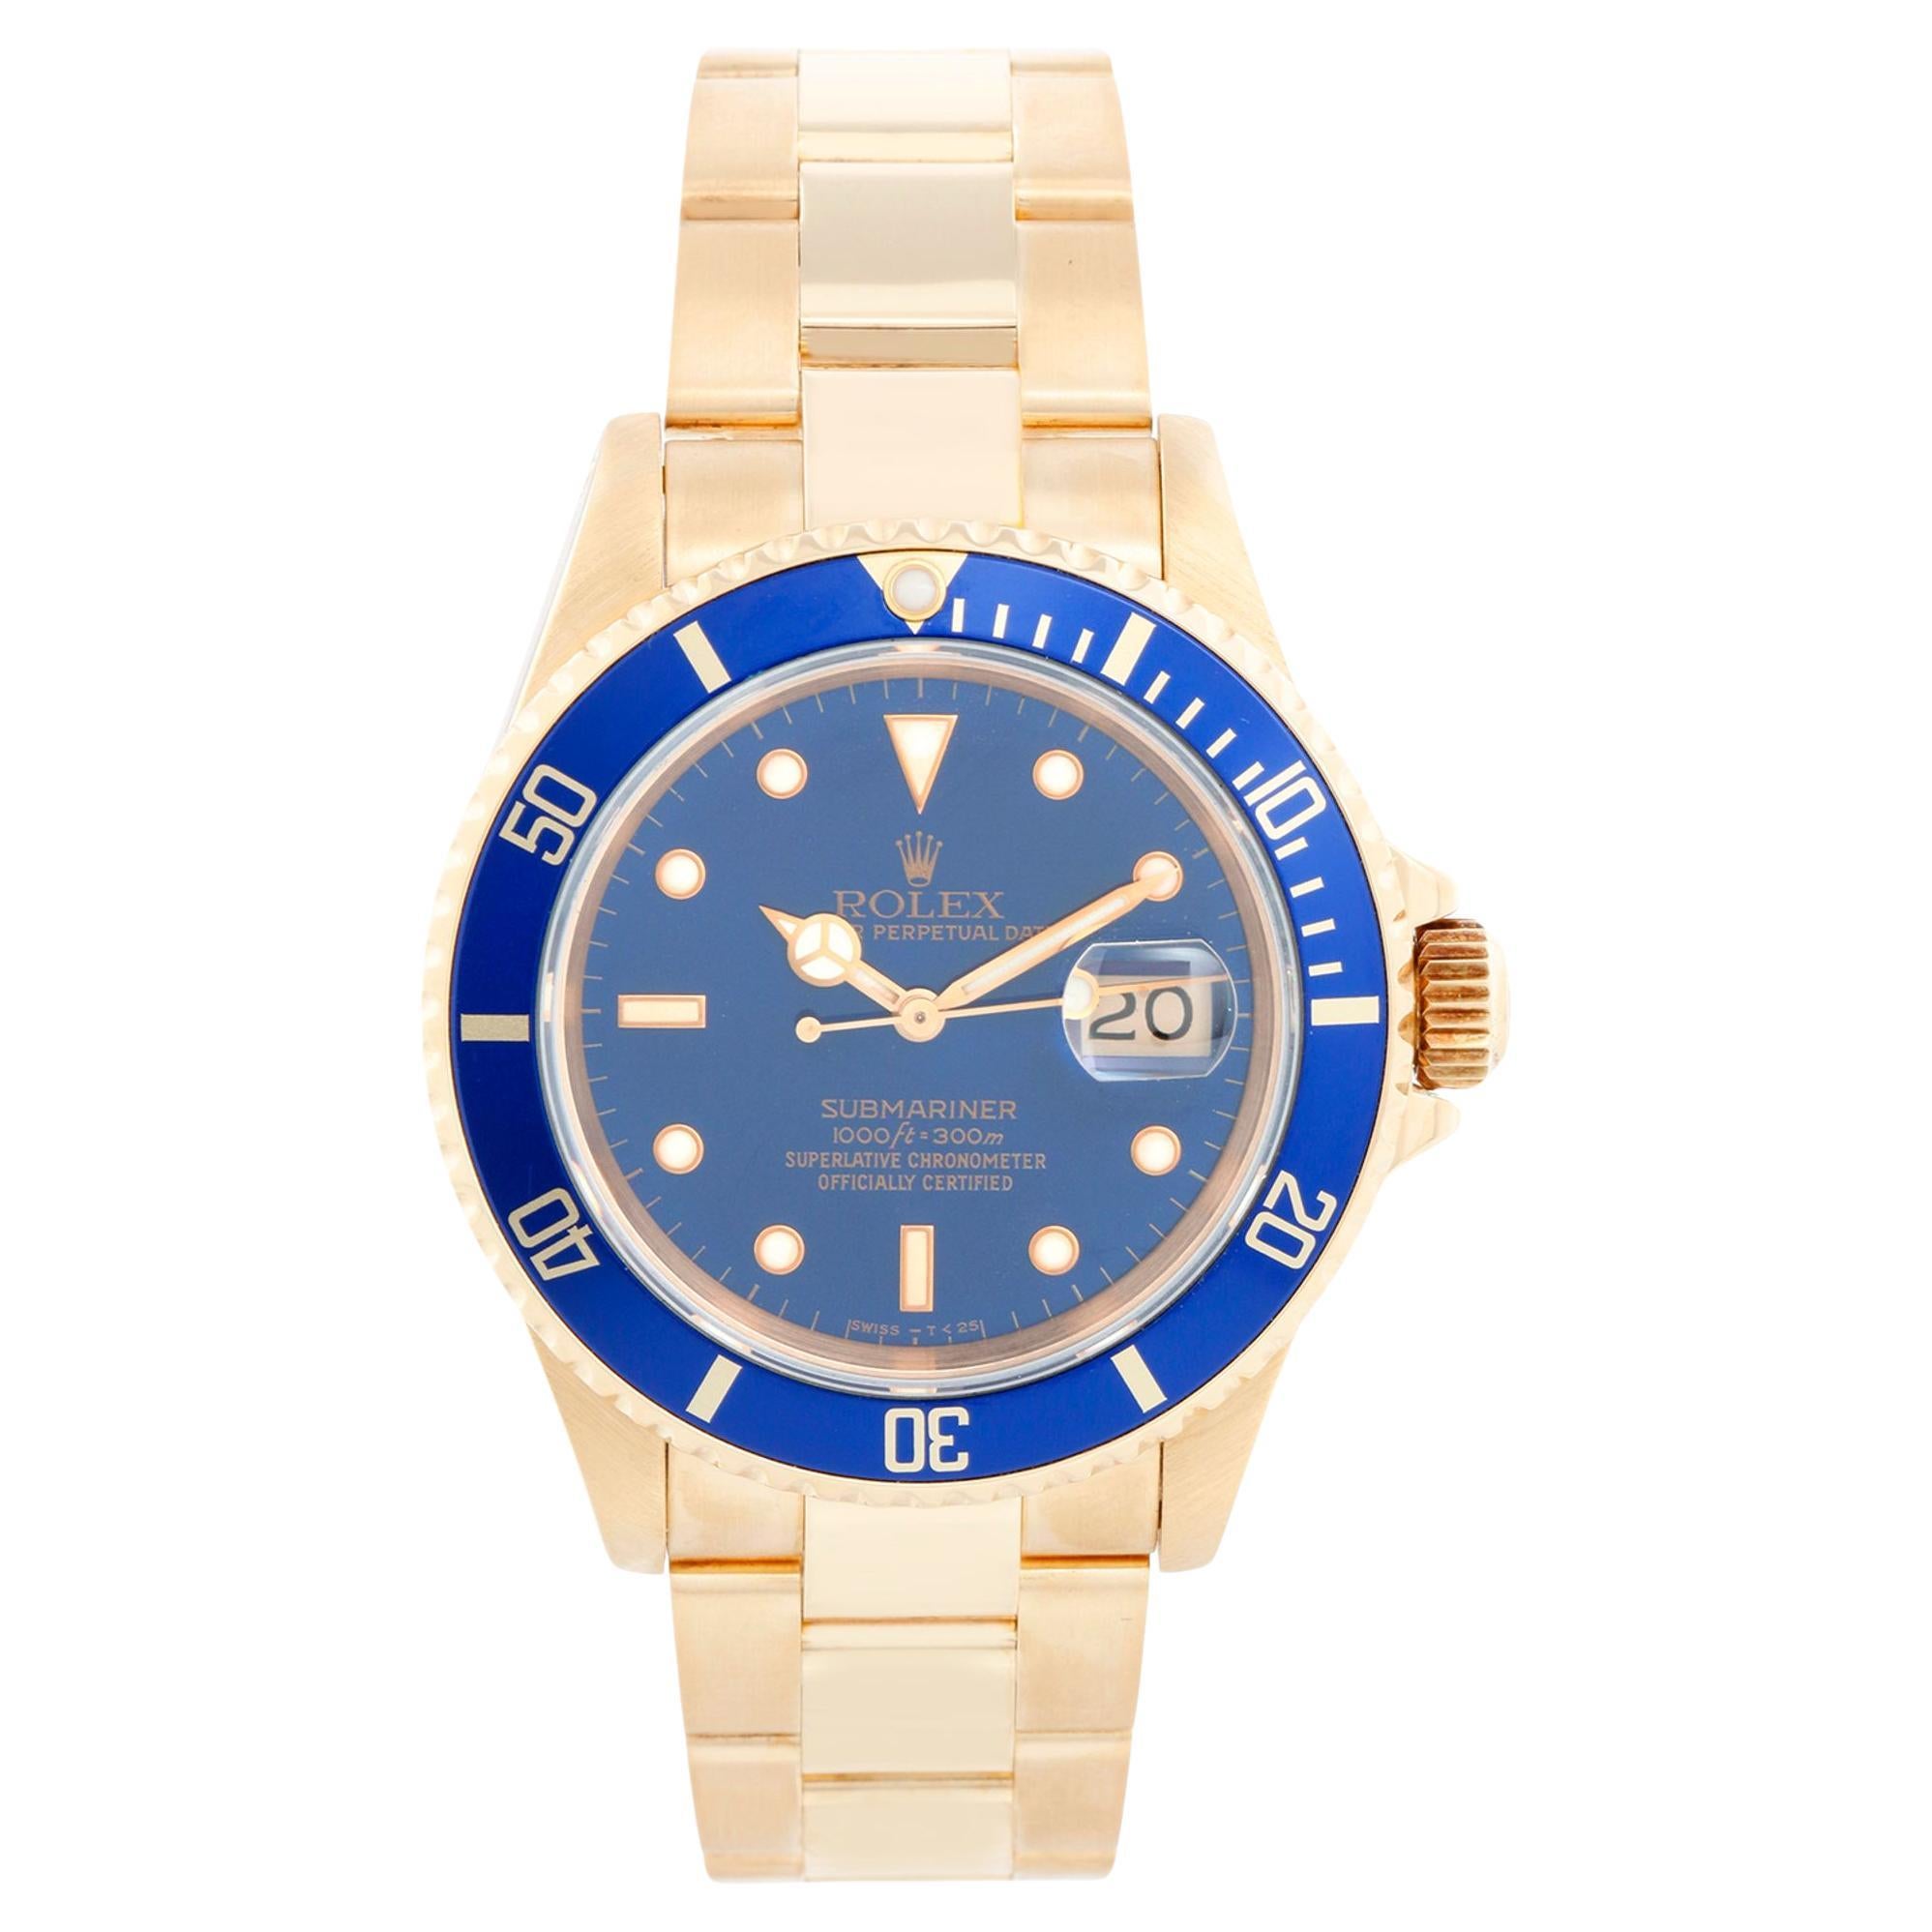 How much gold is in a gold Submariner?